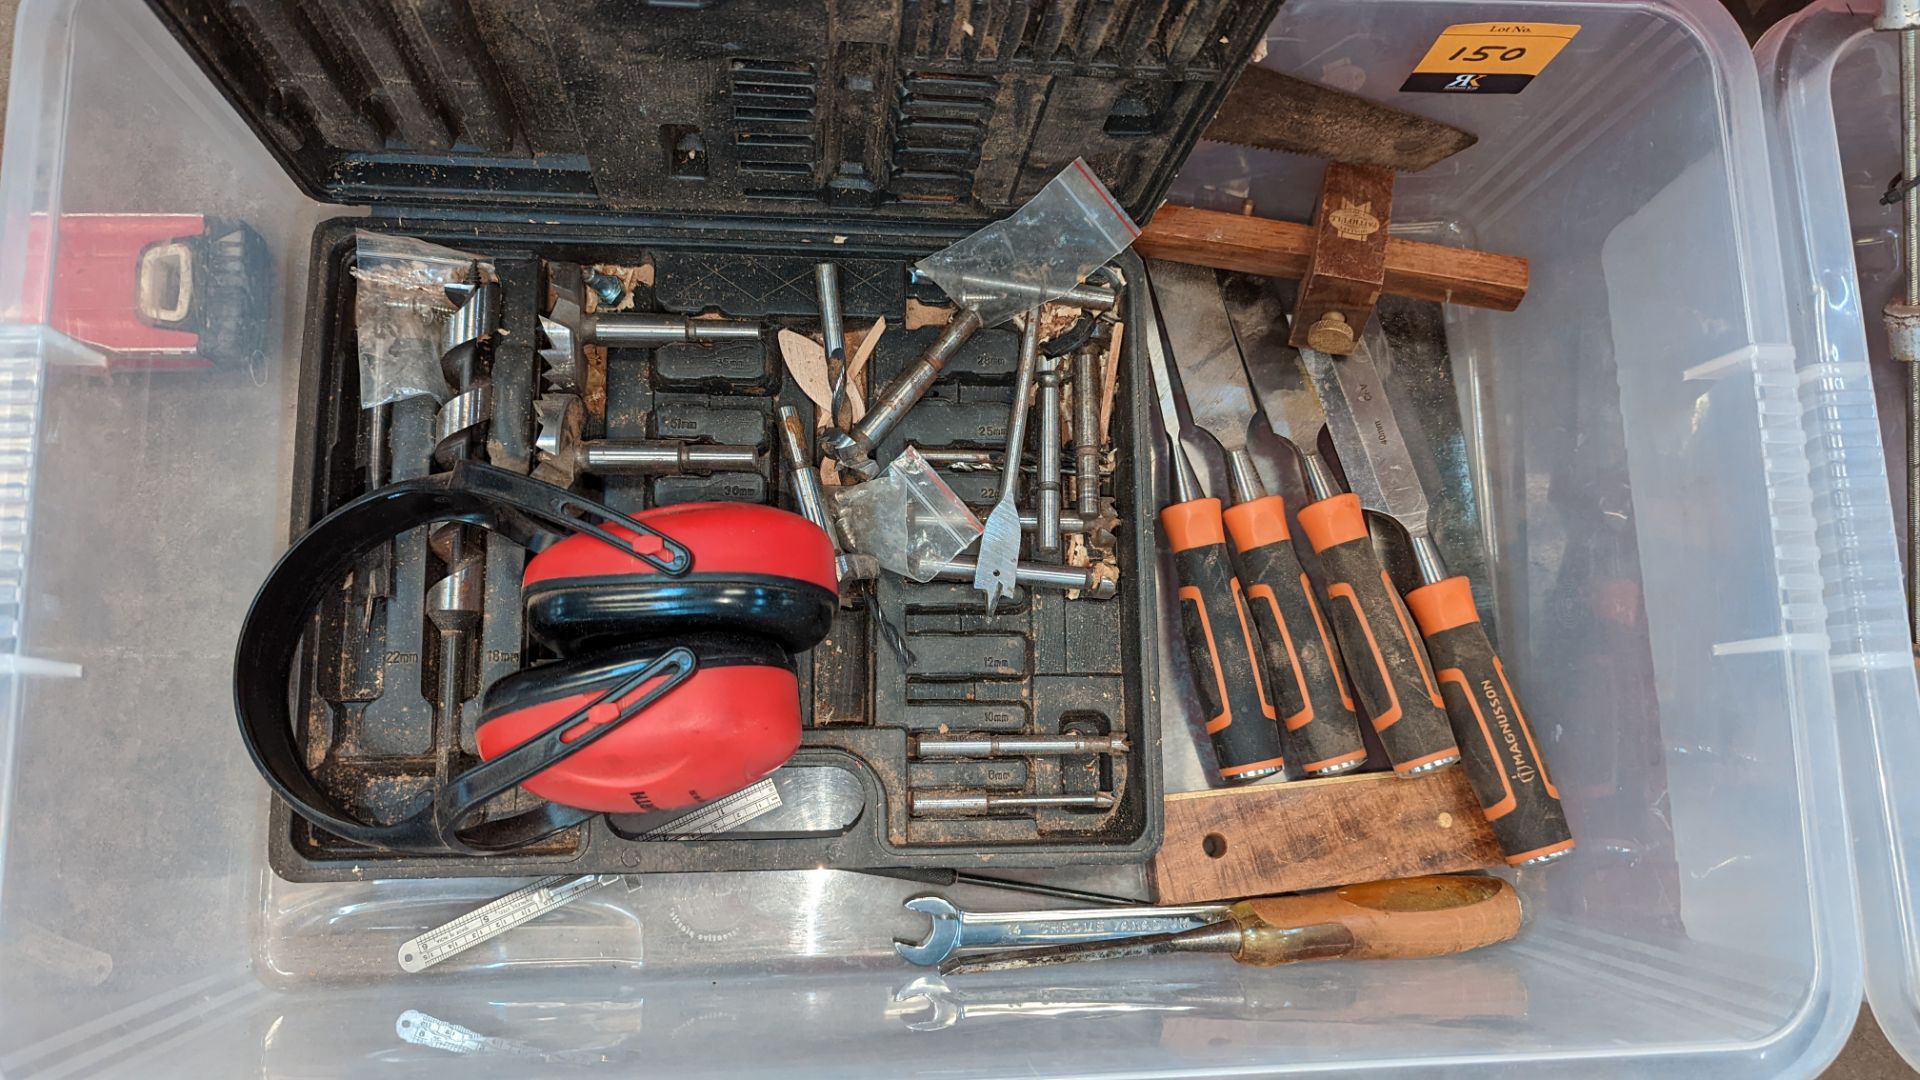 Contents of a crate of hand tools & miscellaneous - crate excluded - Image 4 of 7